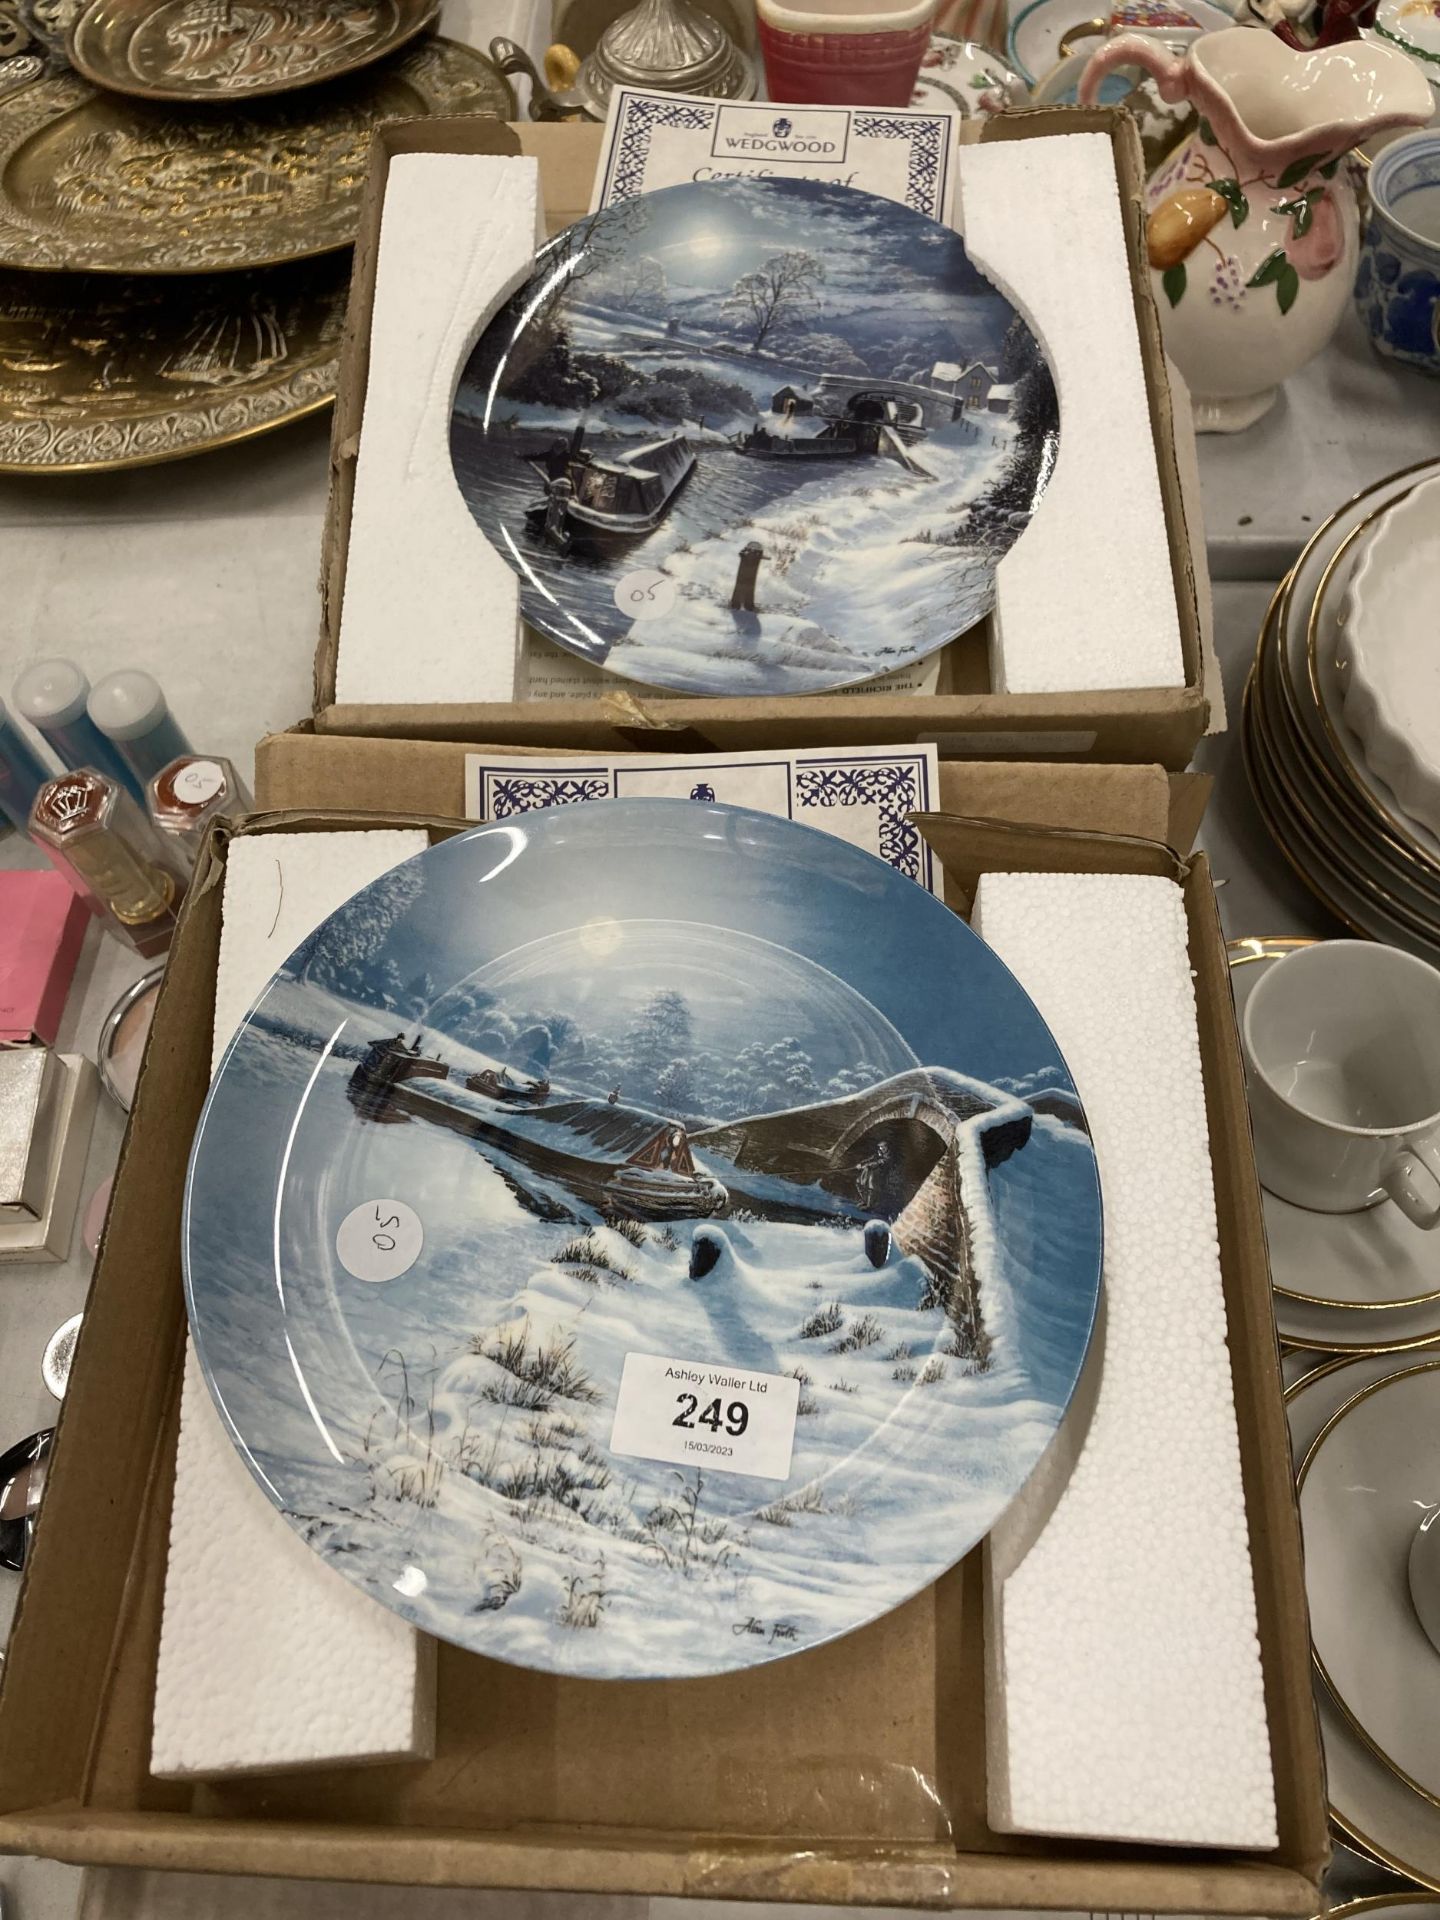 TEN BOXED WEDGWOOD CANAL THEMED PLATES